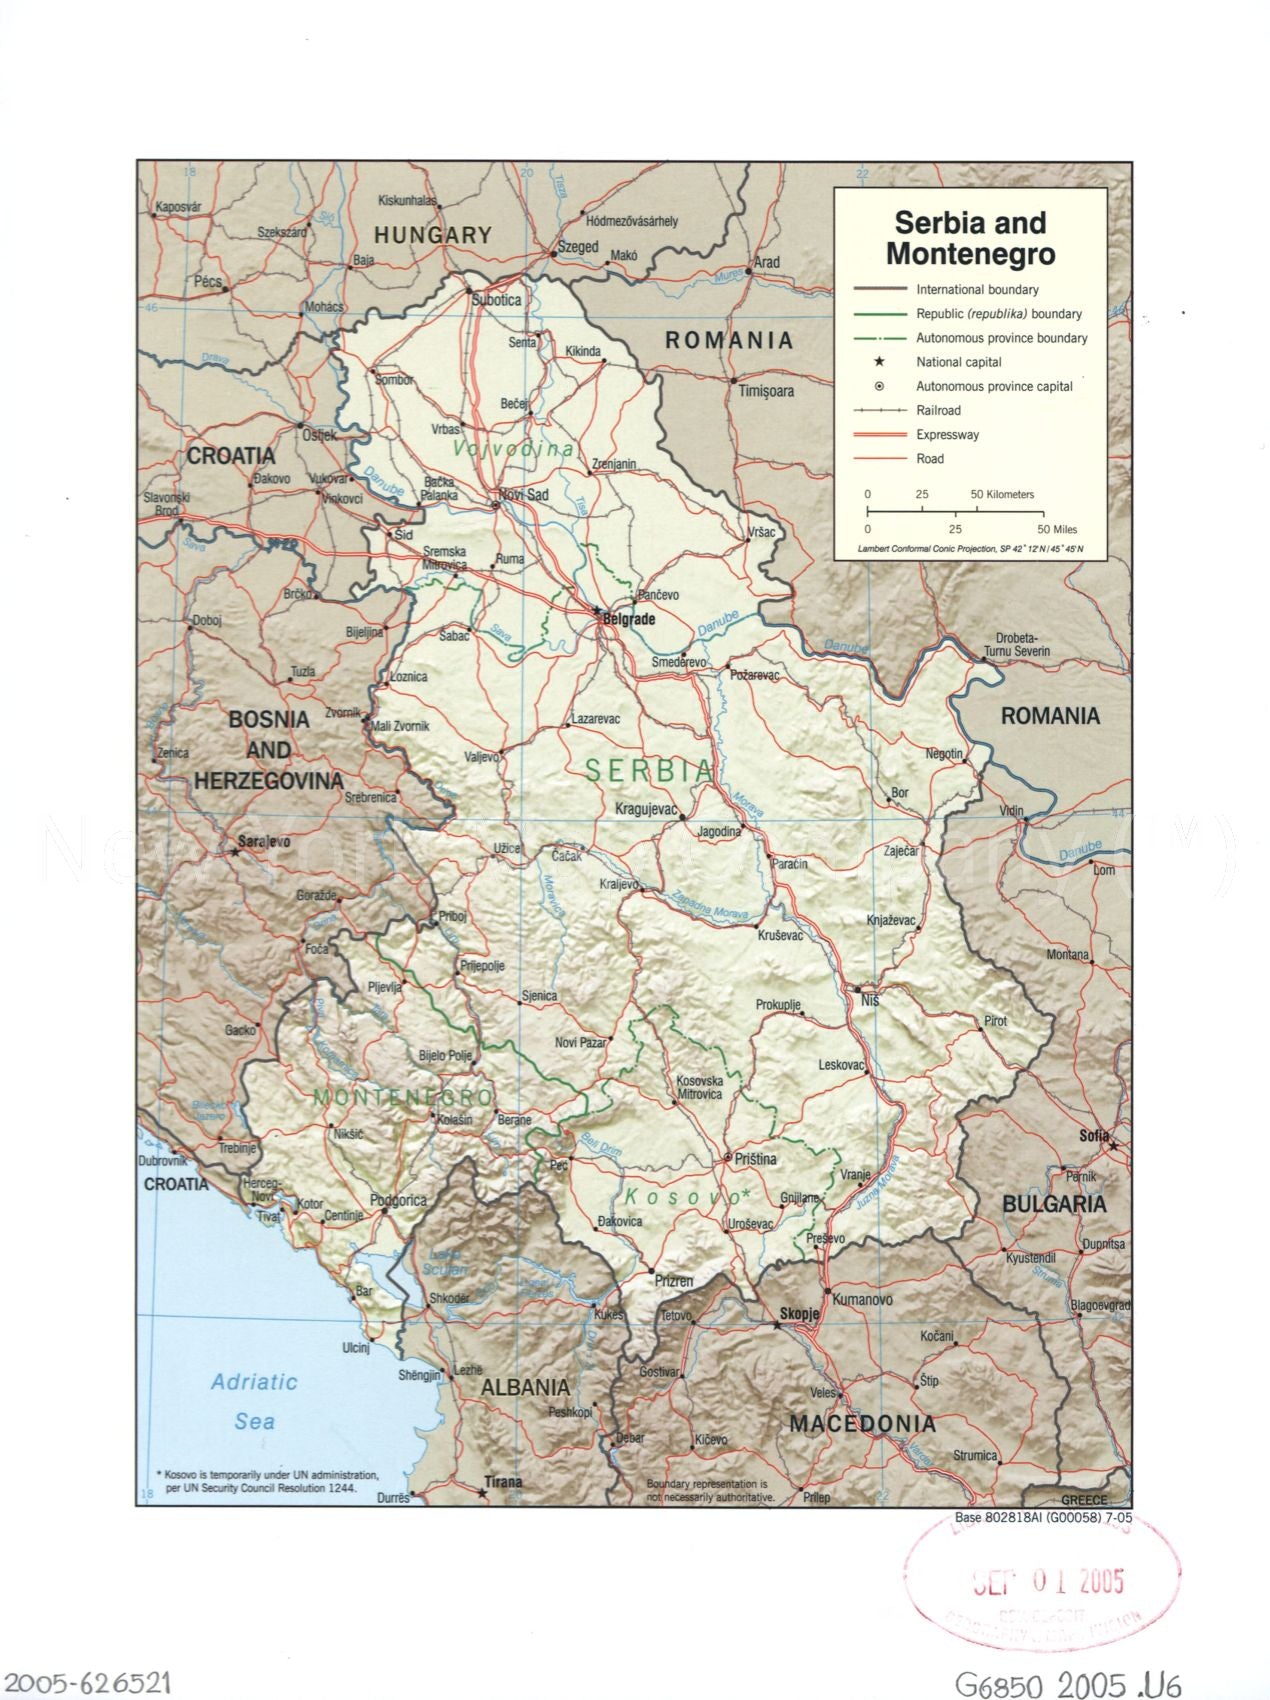 2005 map Serbia and Montenegro. Map Subjects: Montenegro | Serbia | Serbia and Montenegro